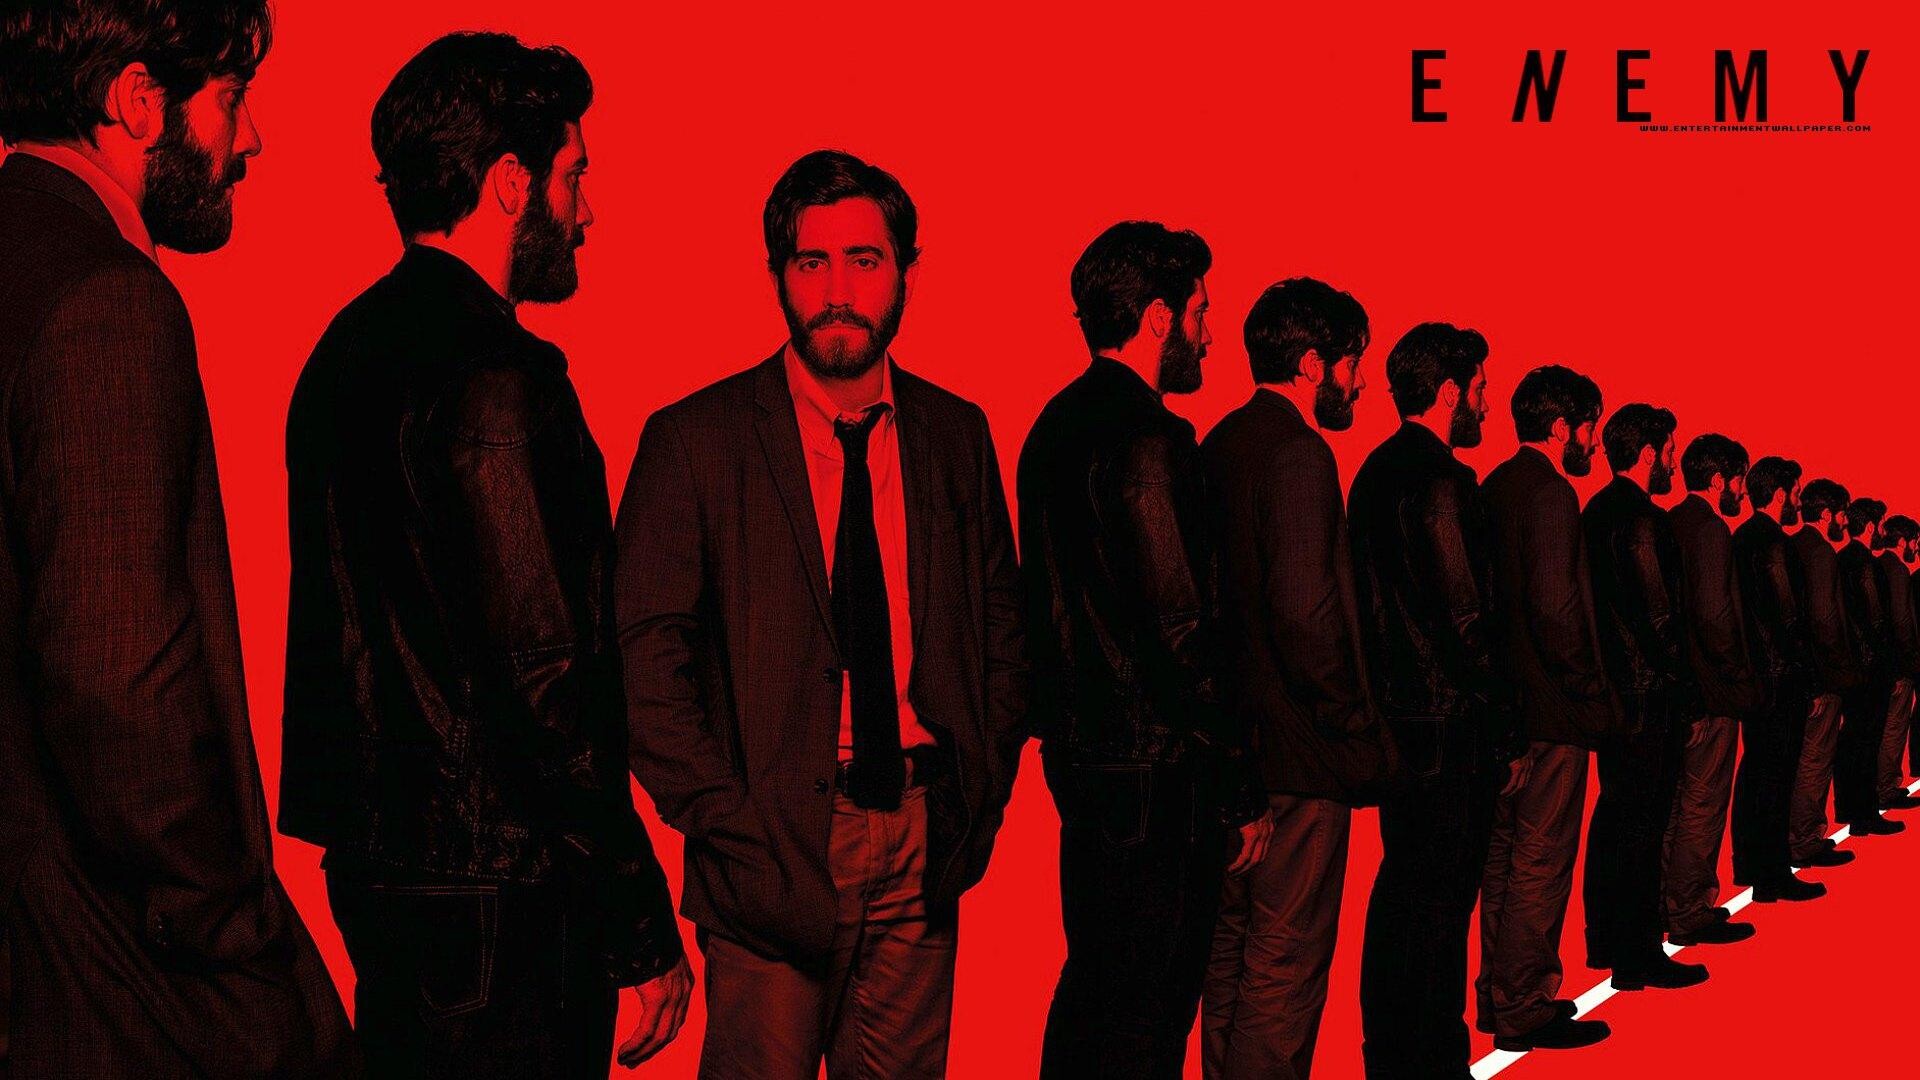 Enemy (Movie 2013): Adam Bell, A history professor, and Daniel Saint Claire, An actor, Identical appearance. 1920x1080 Full HD Background.